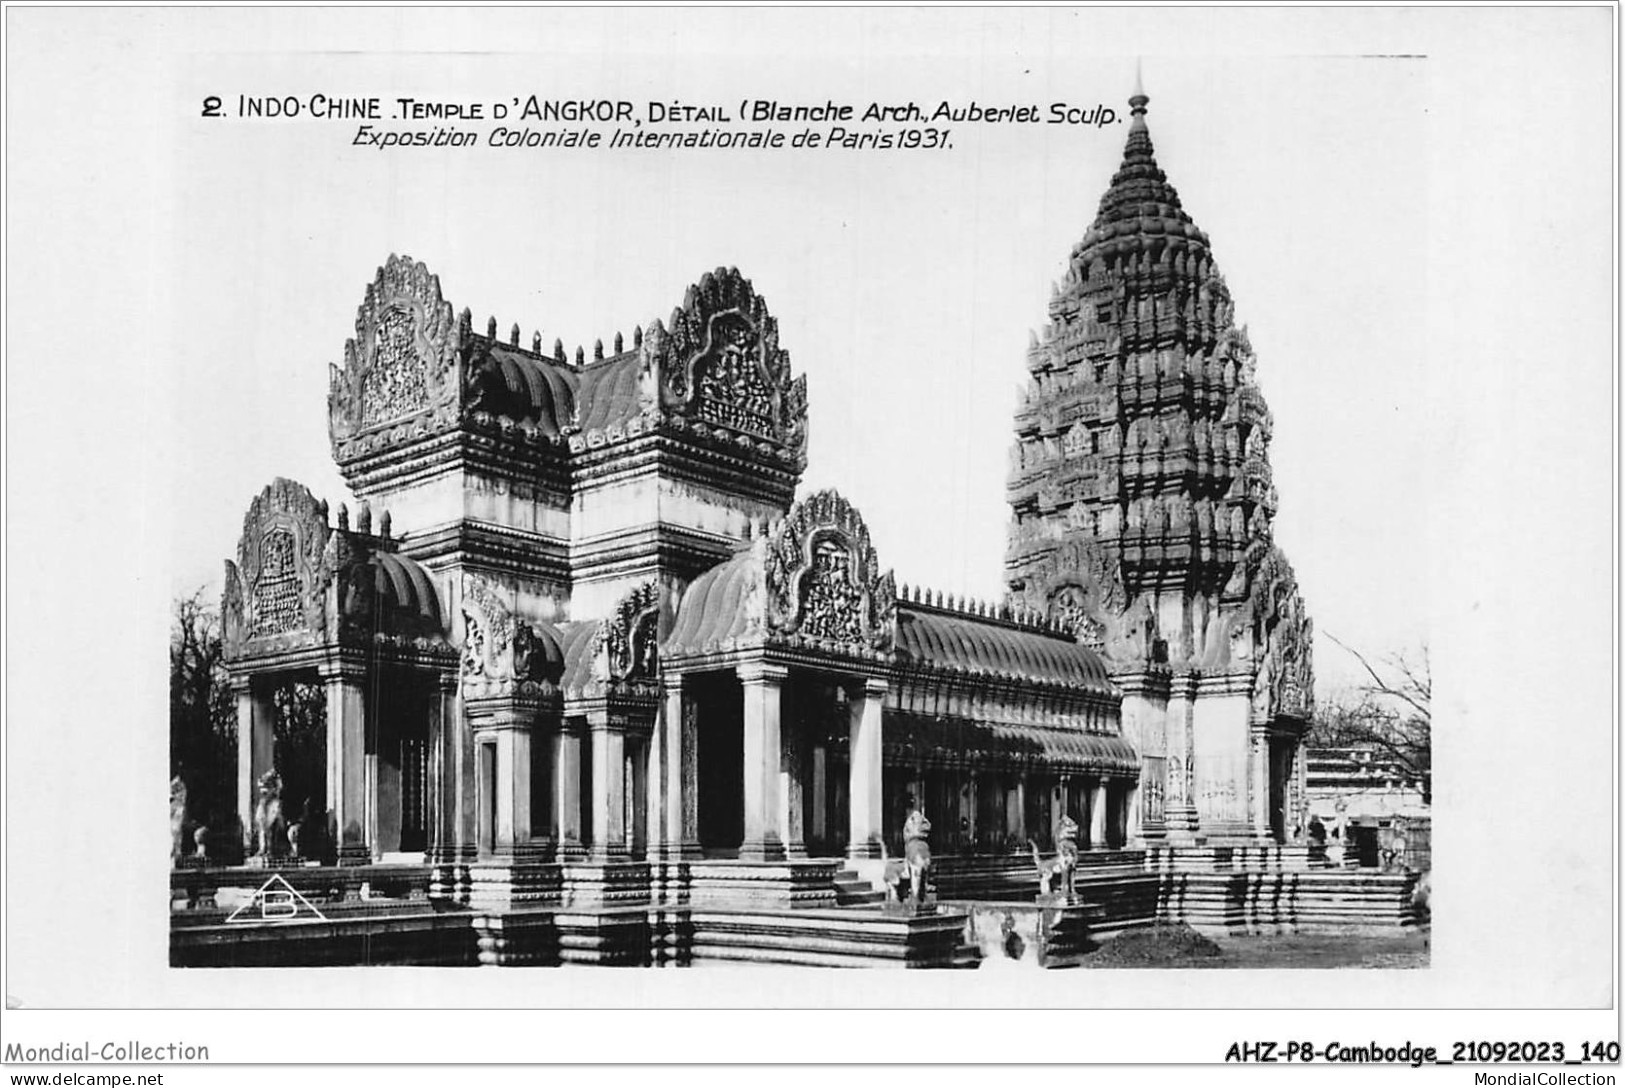 AHZP8-CAMBODGE-0753 - EXPOSITION COLONIALE INTERNATIONALE - PARIS 1931 - INDO-CHINE - TEMPLE D'ANGKOR - DETAIL - Cambodia